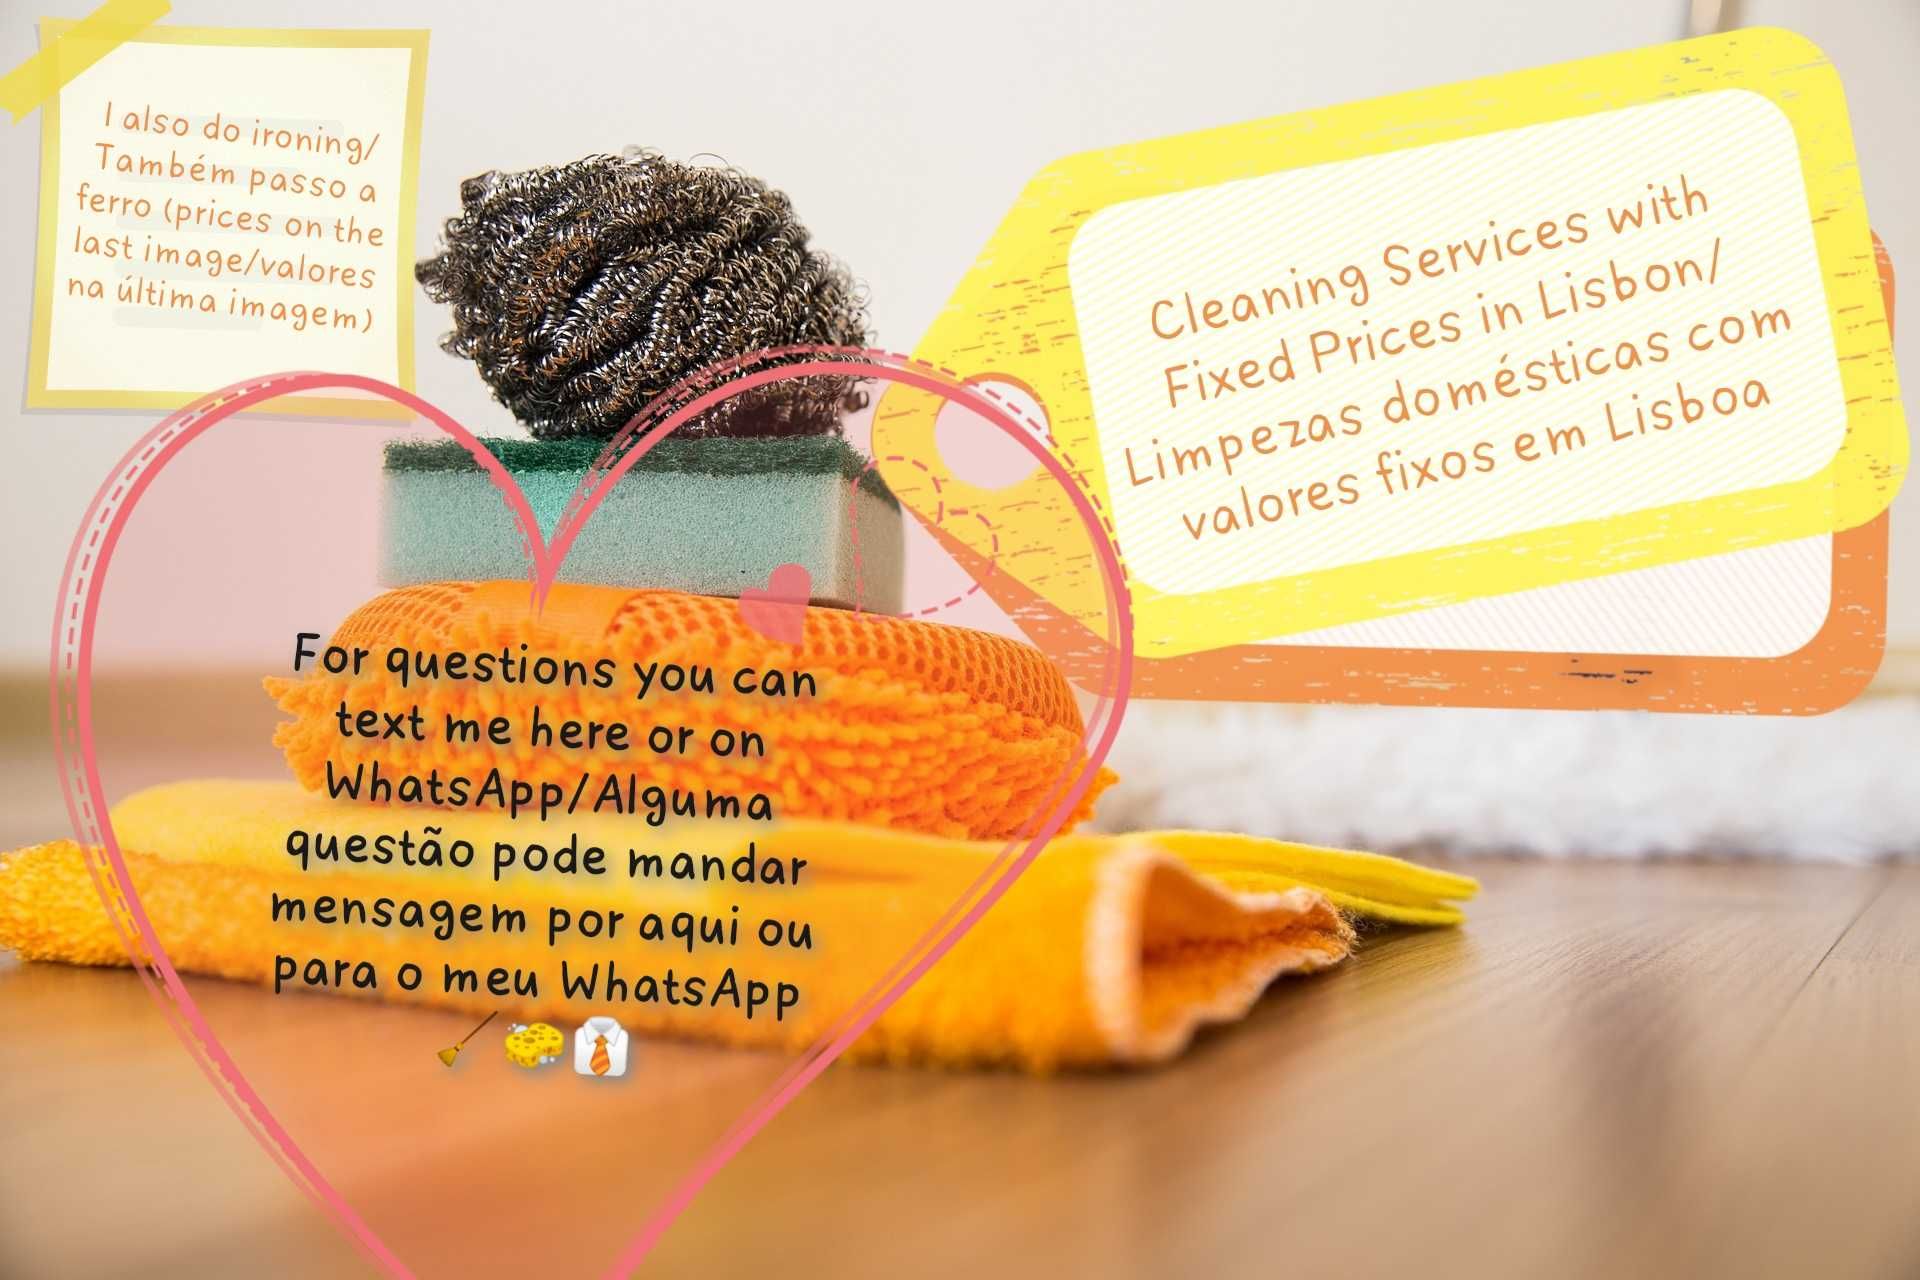 Limpezas Domésticas/Cleaning Services With Fixed Prices in Lisbon